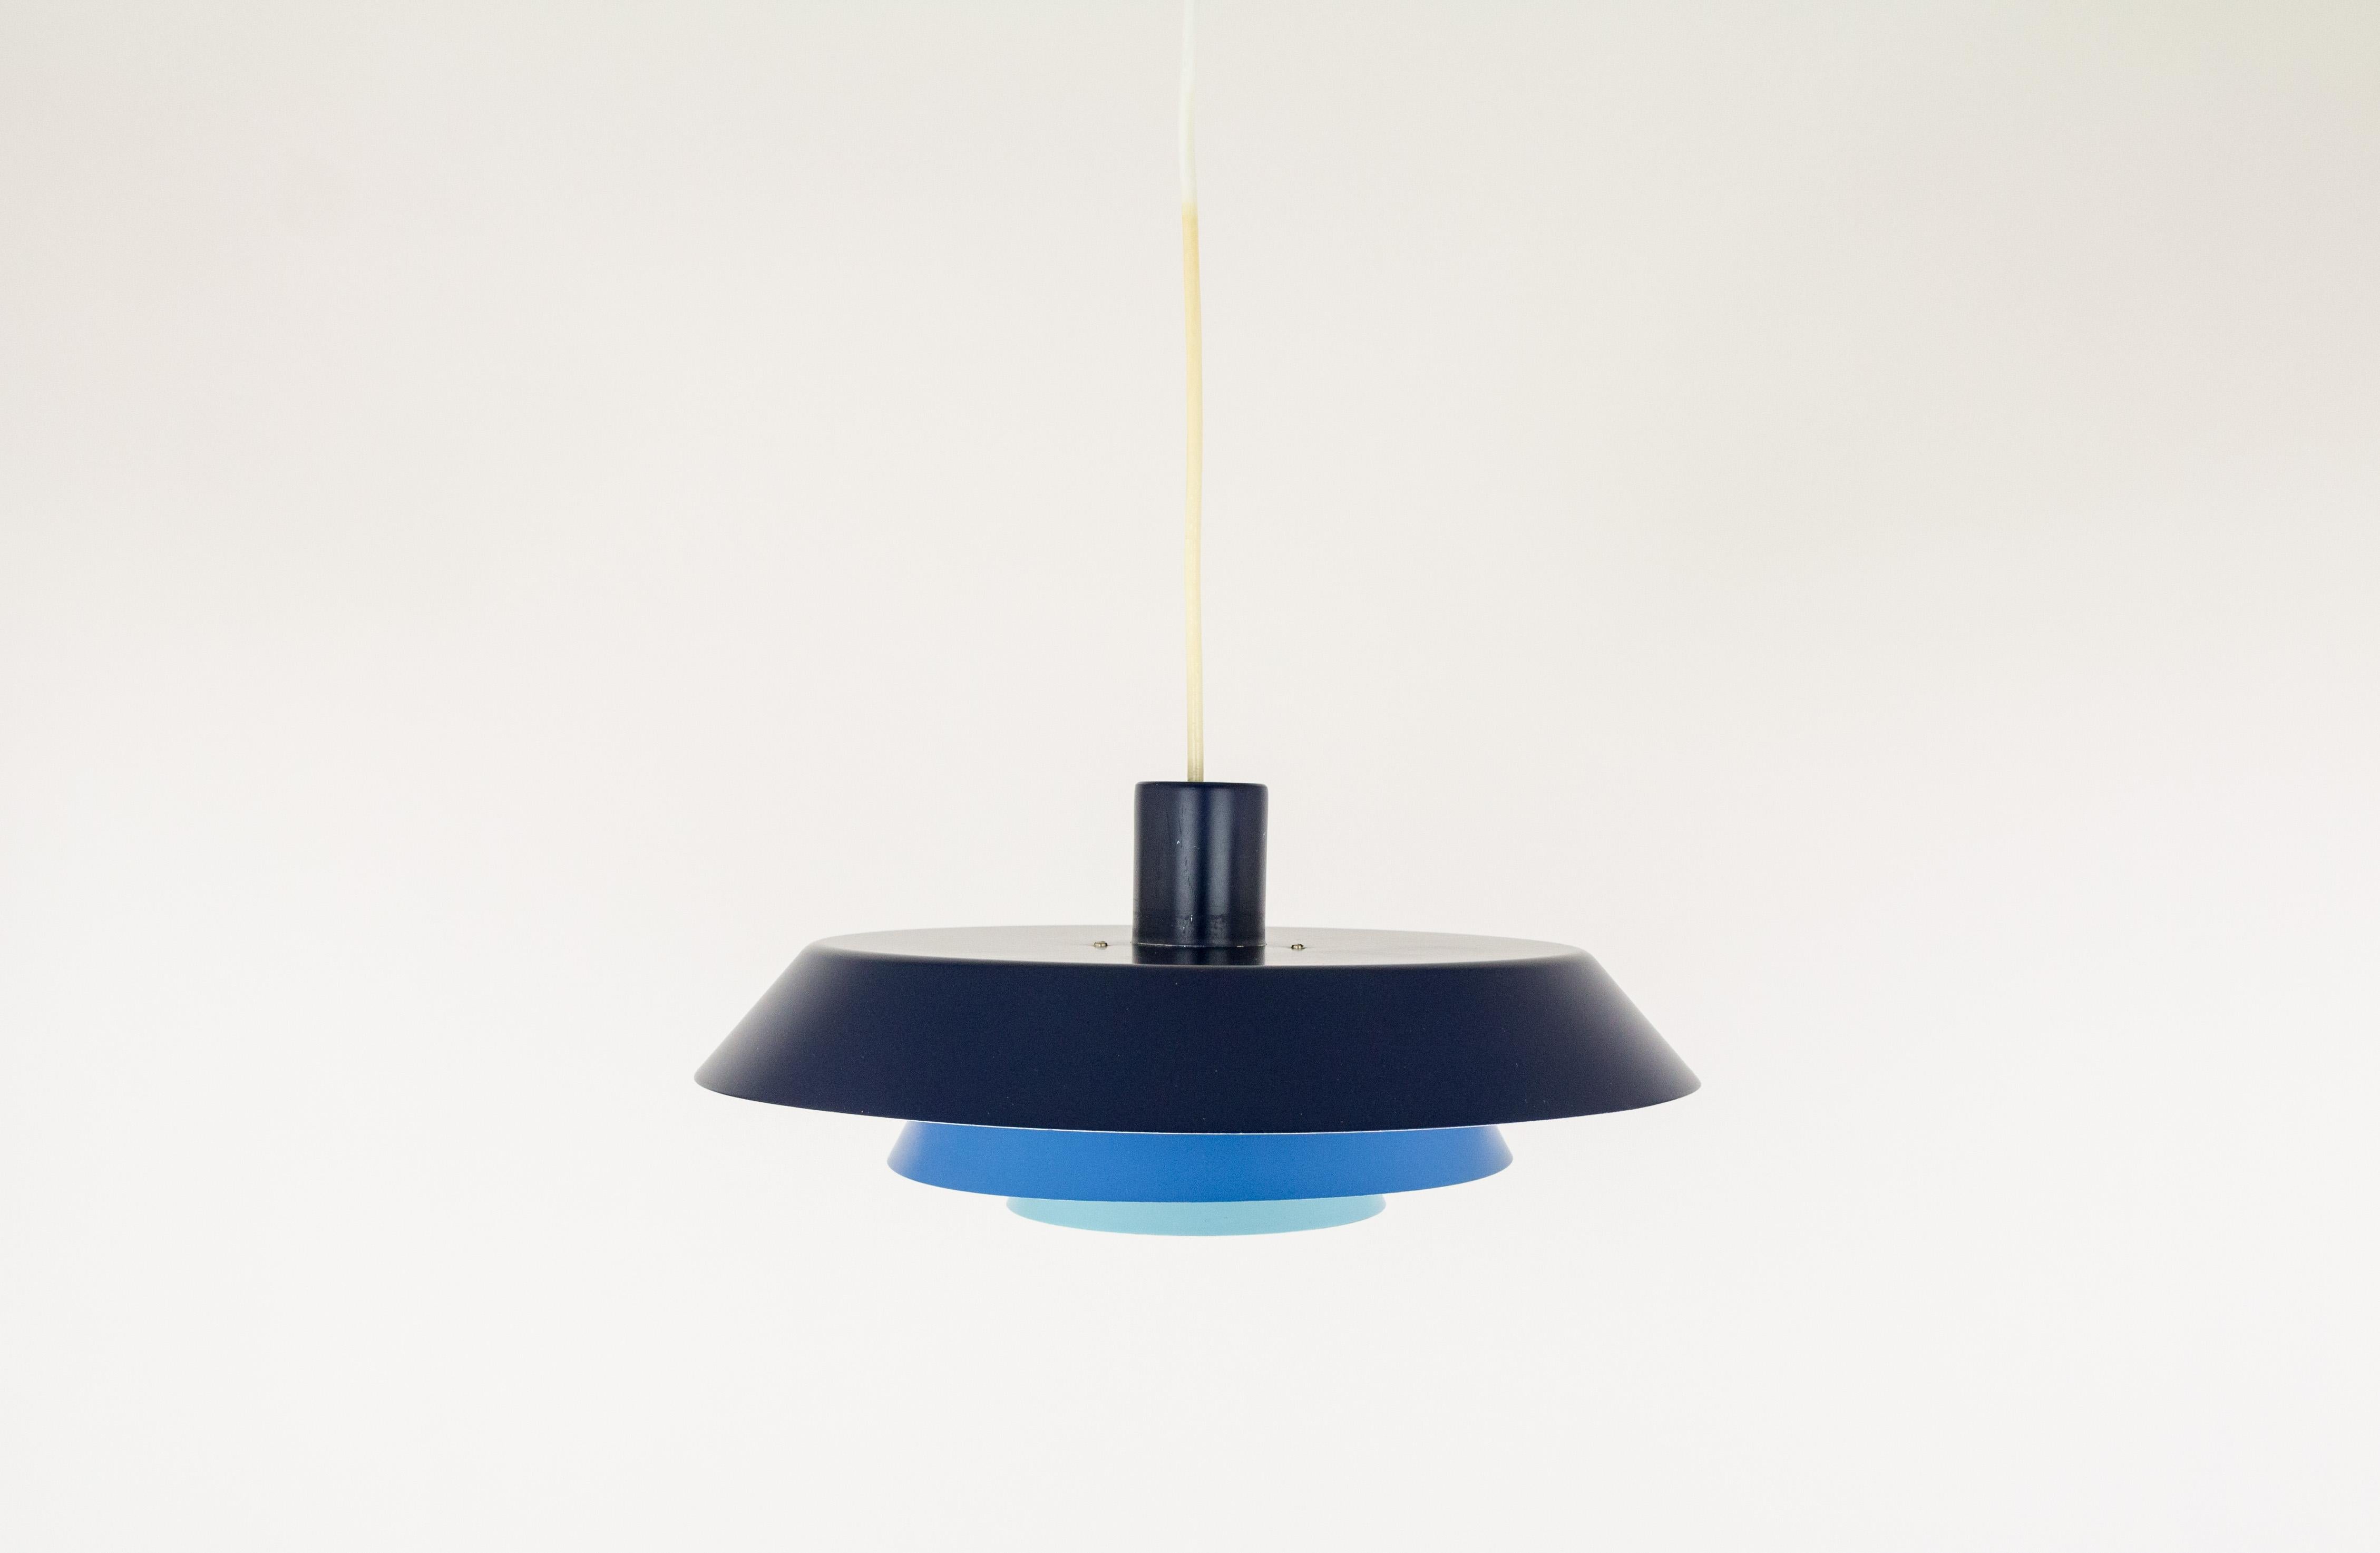 Bent Karlby, the most productive designer for Lyfa, created the Troika pendant in 1968. It is part of the so called Lyfalux series, which are according to the advertisement “shining examples of modern lightings”.

Karlby designed three versions of